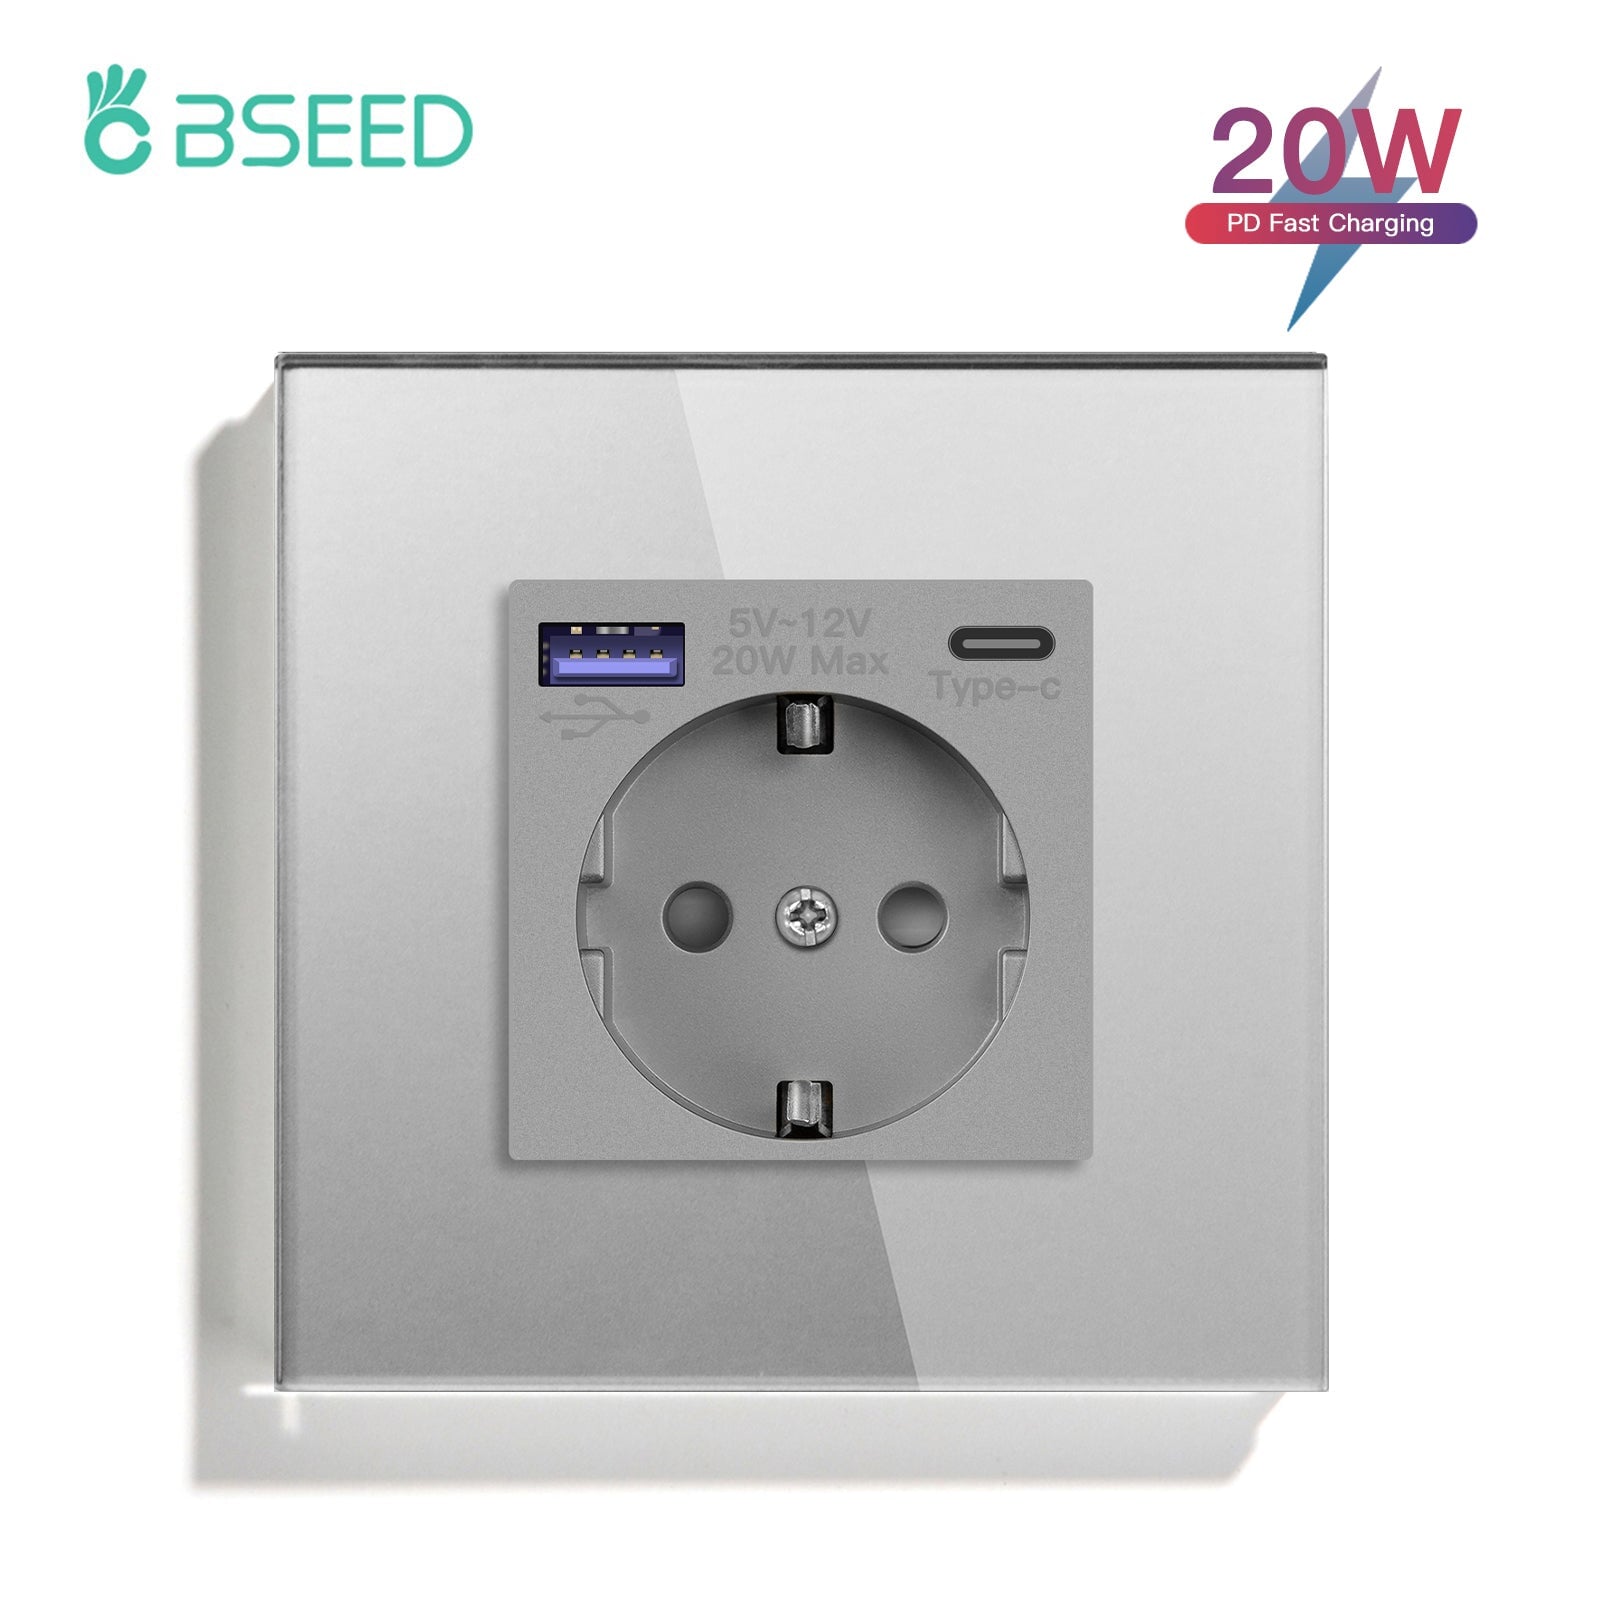 BSEED EU sockets with 20W PD Fast Charge Type-C Interface Outlet Wall Socket Power Outlets & Sockets Bseedswitch Grey Signle 